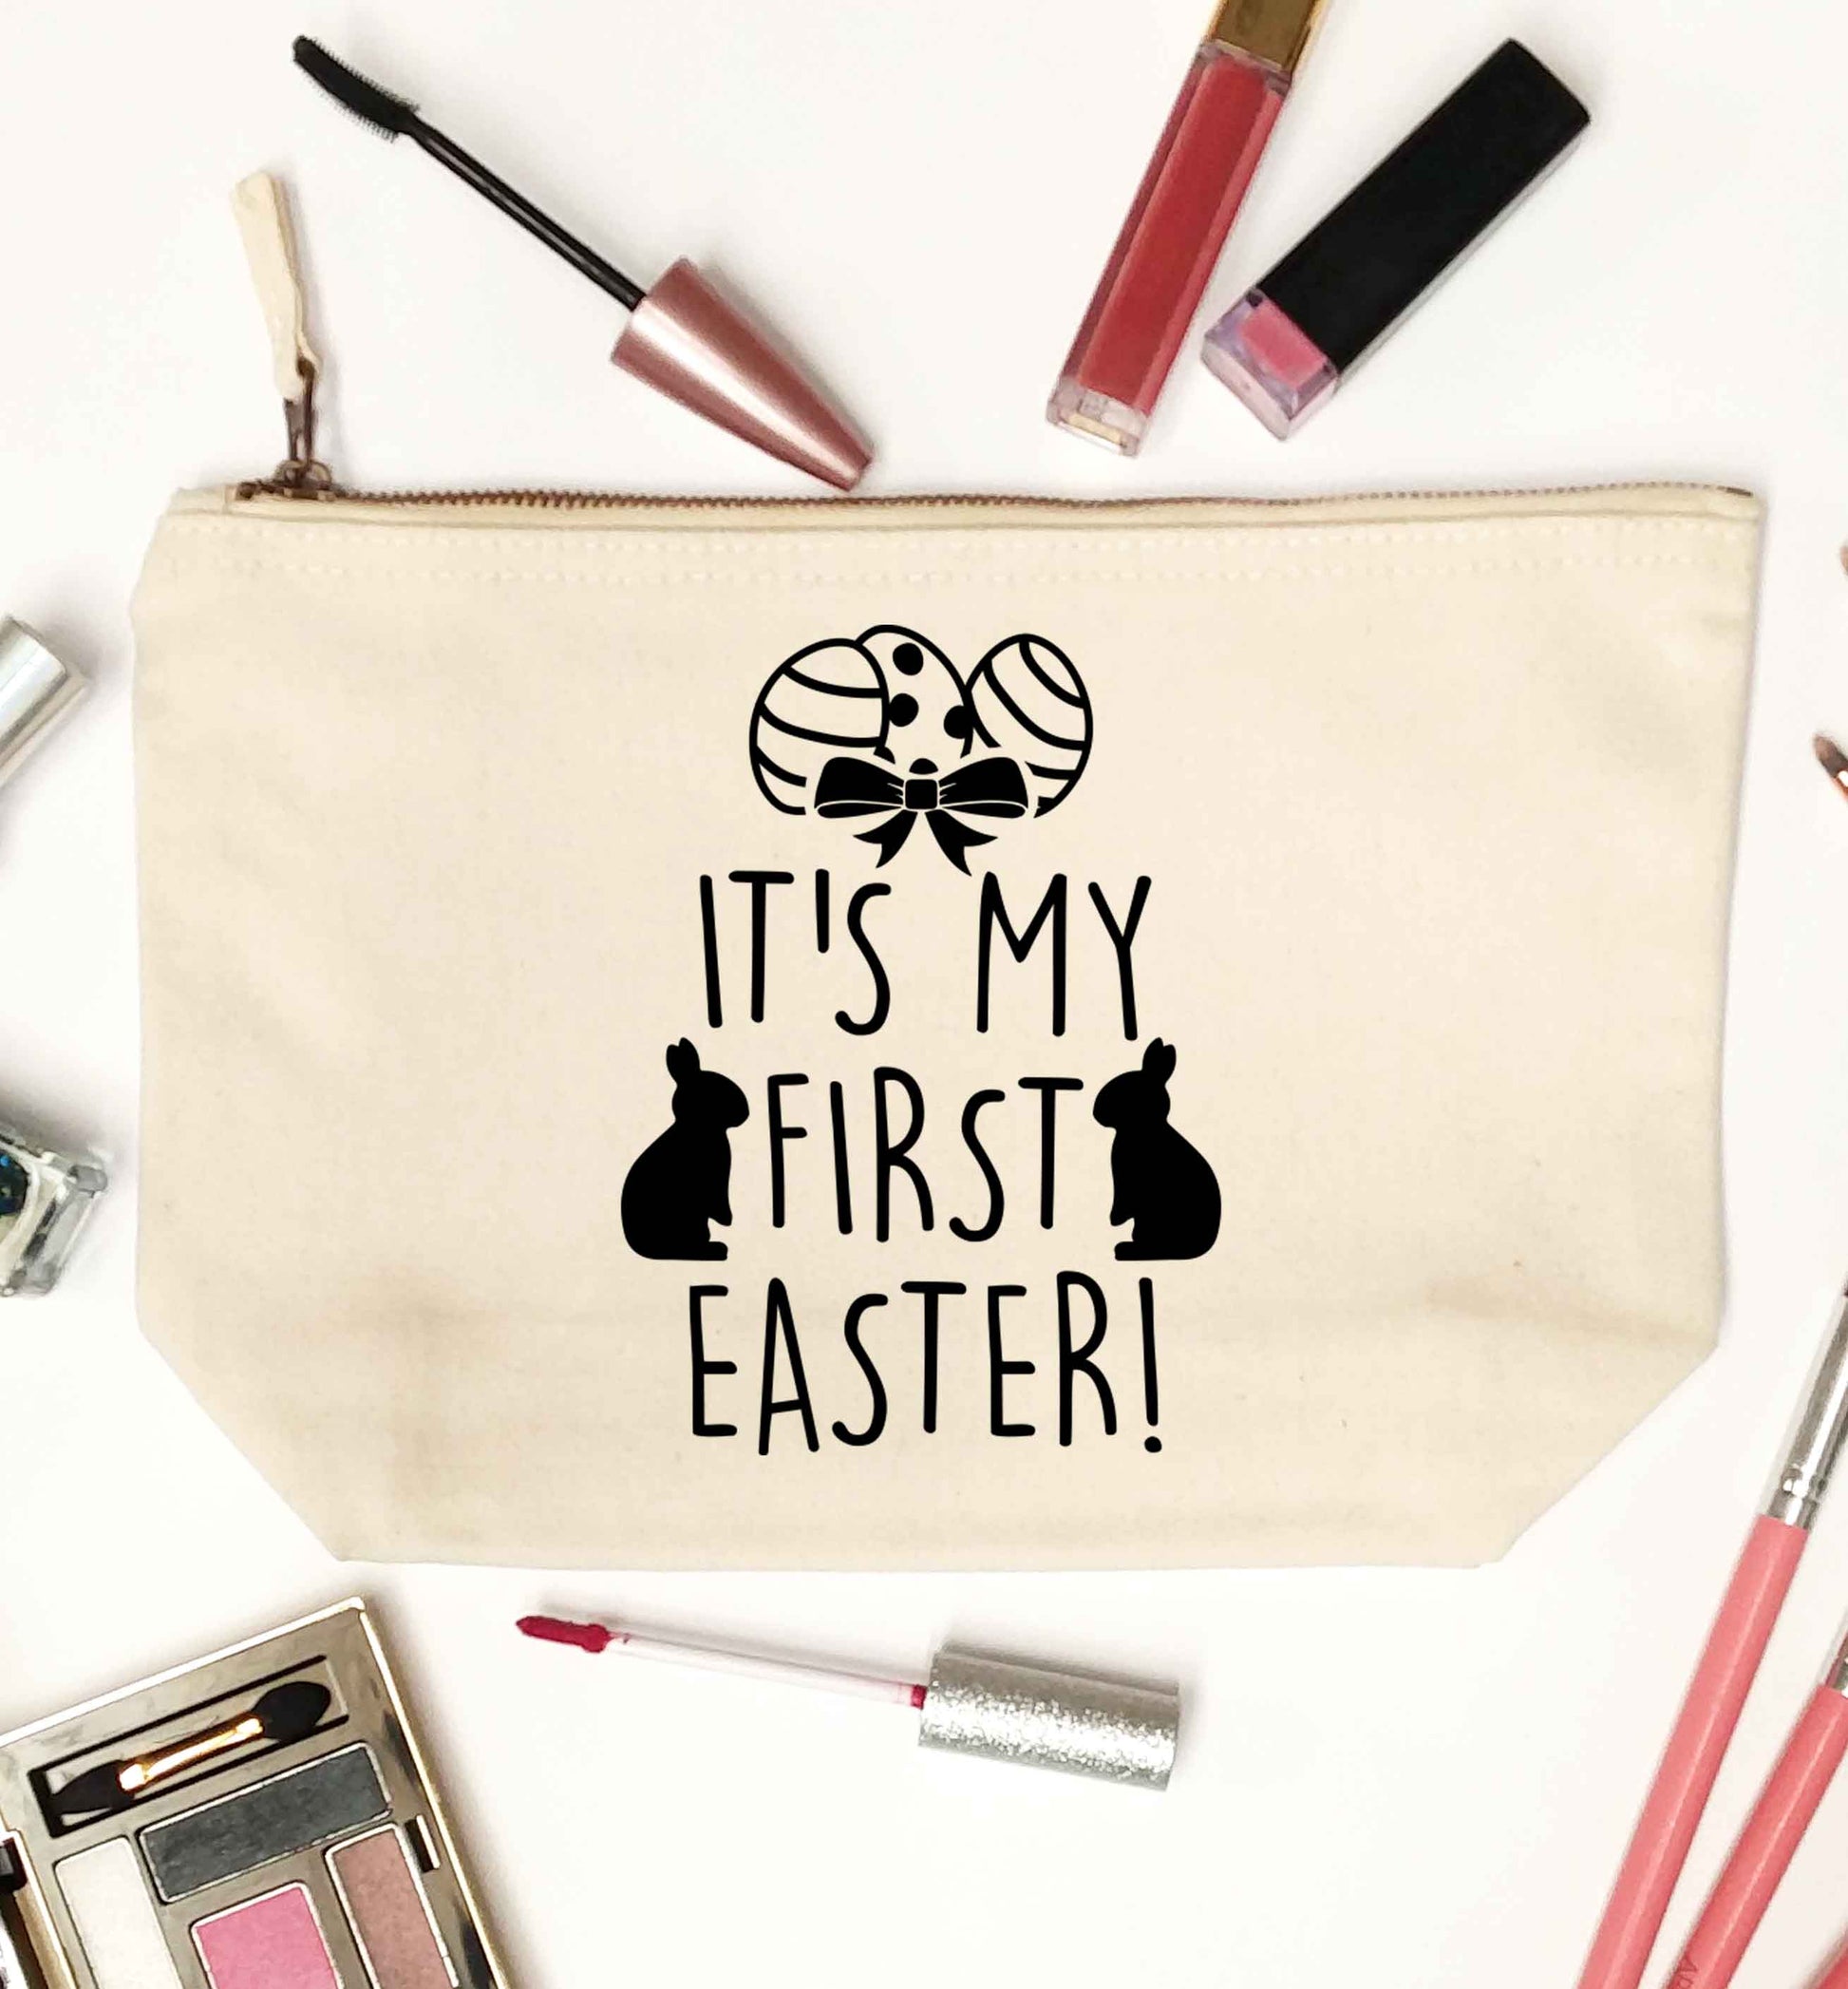 It's my first Easter natural makeup bag